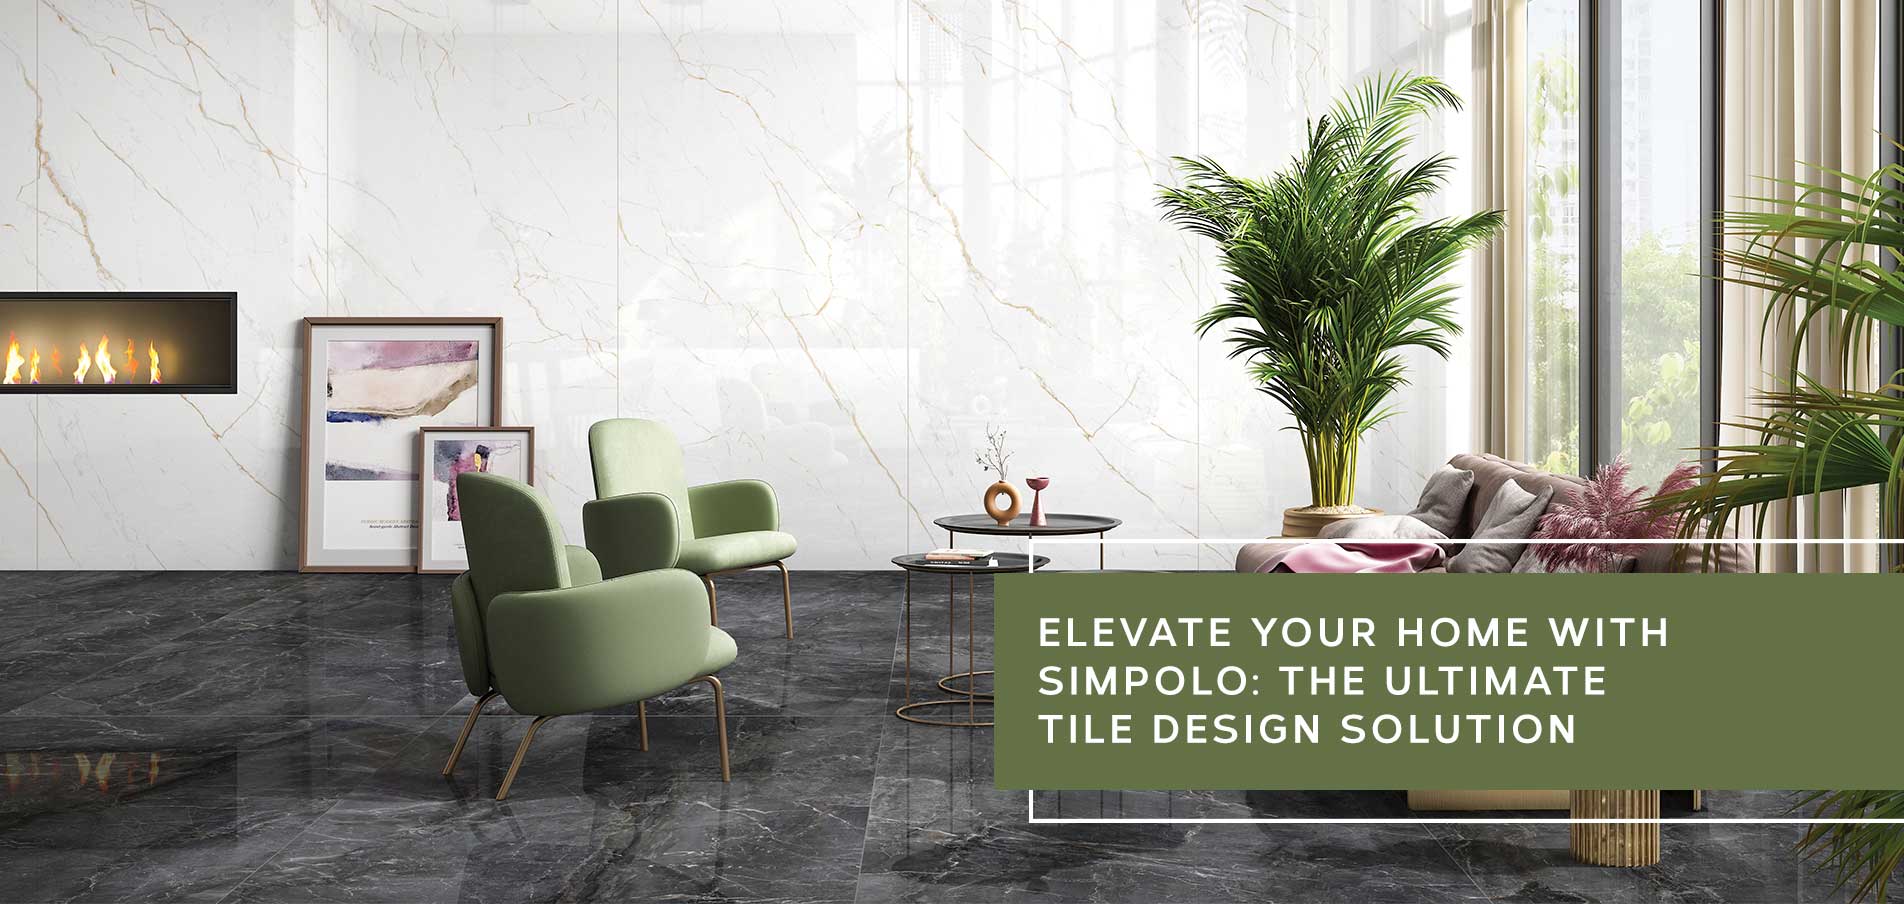 Elevate Your Home With Simpolos The Ultimate Tile Design Solution